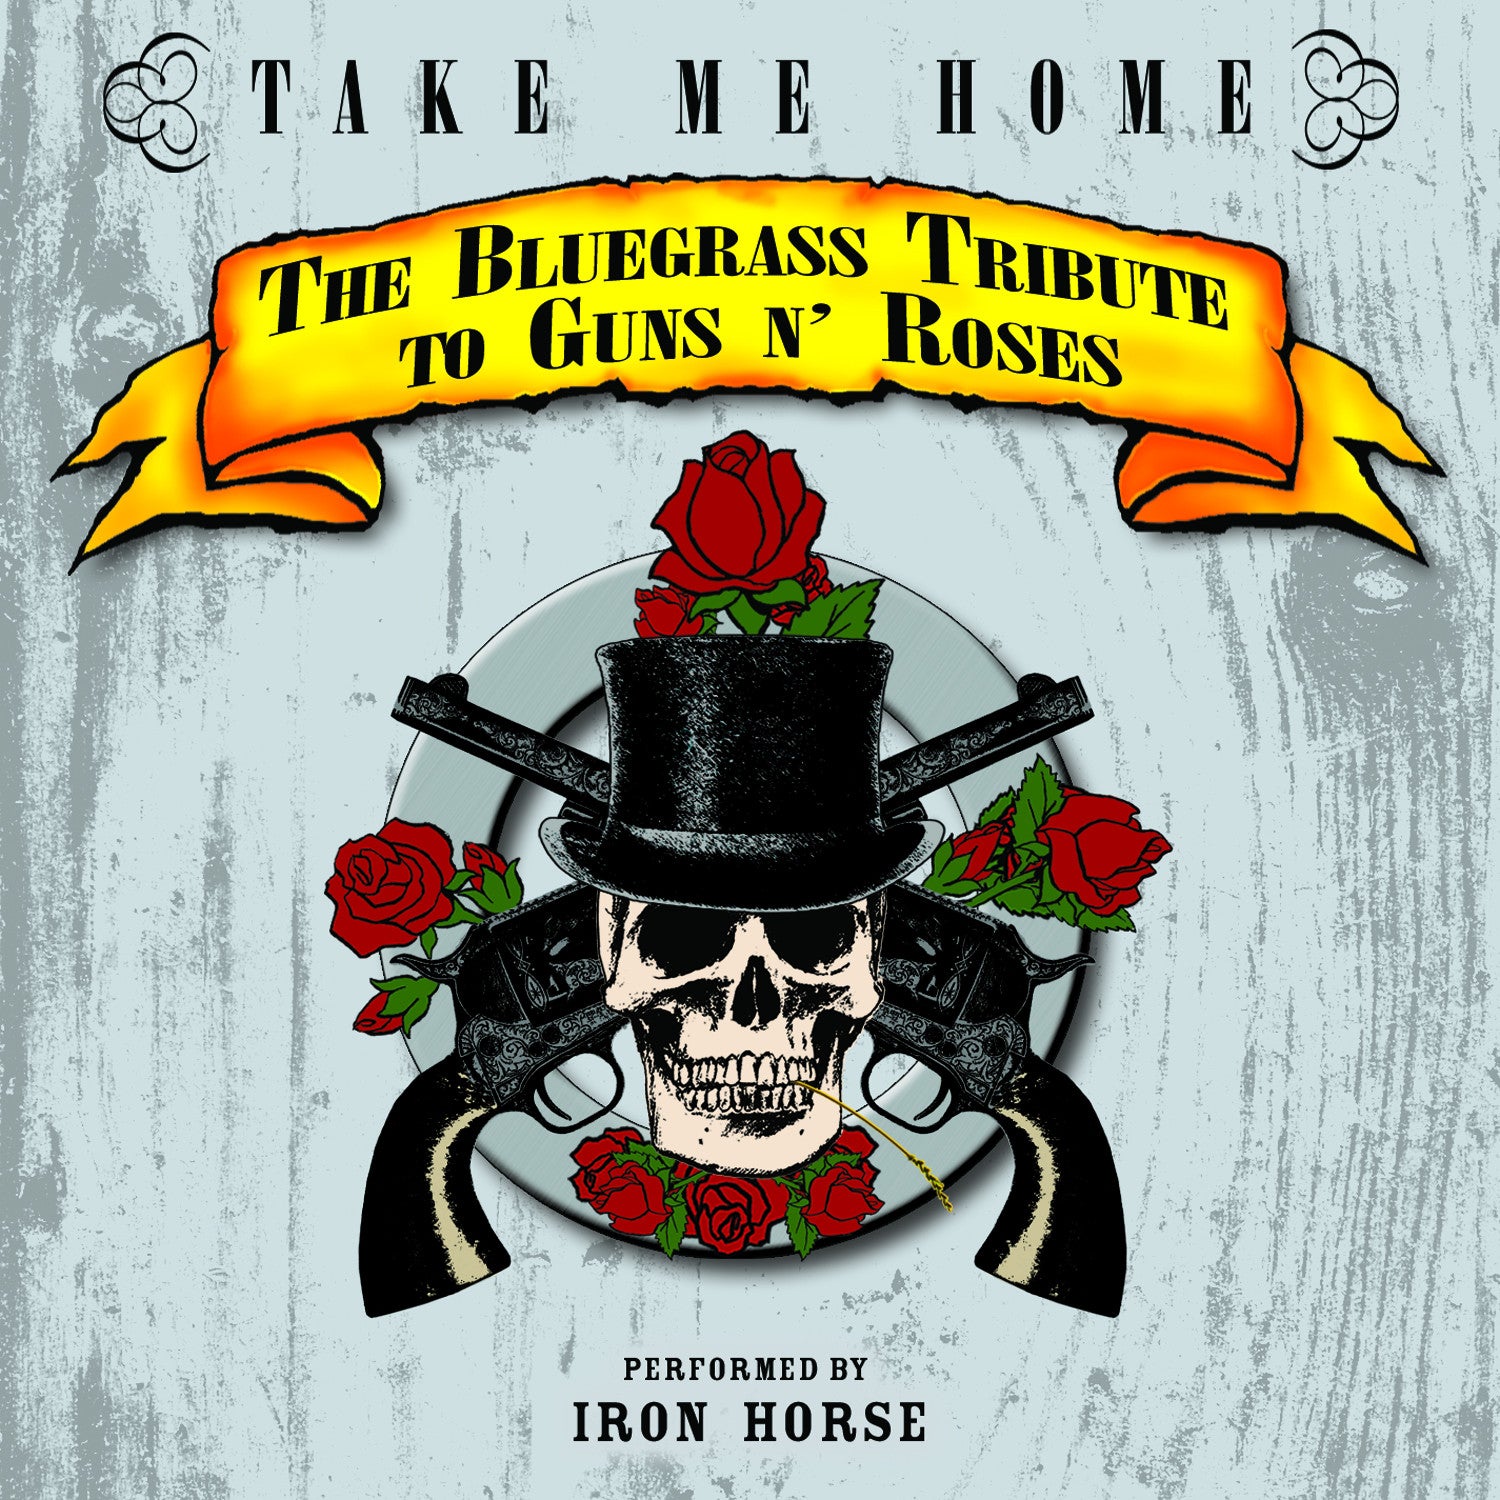 Take Me Home: The Bluegrass Tribute to Guns N' Roses